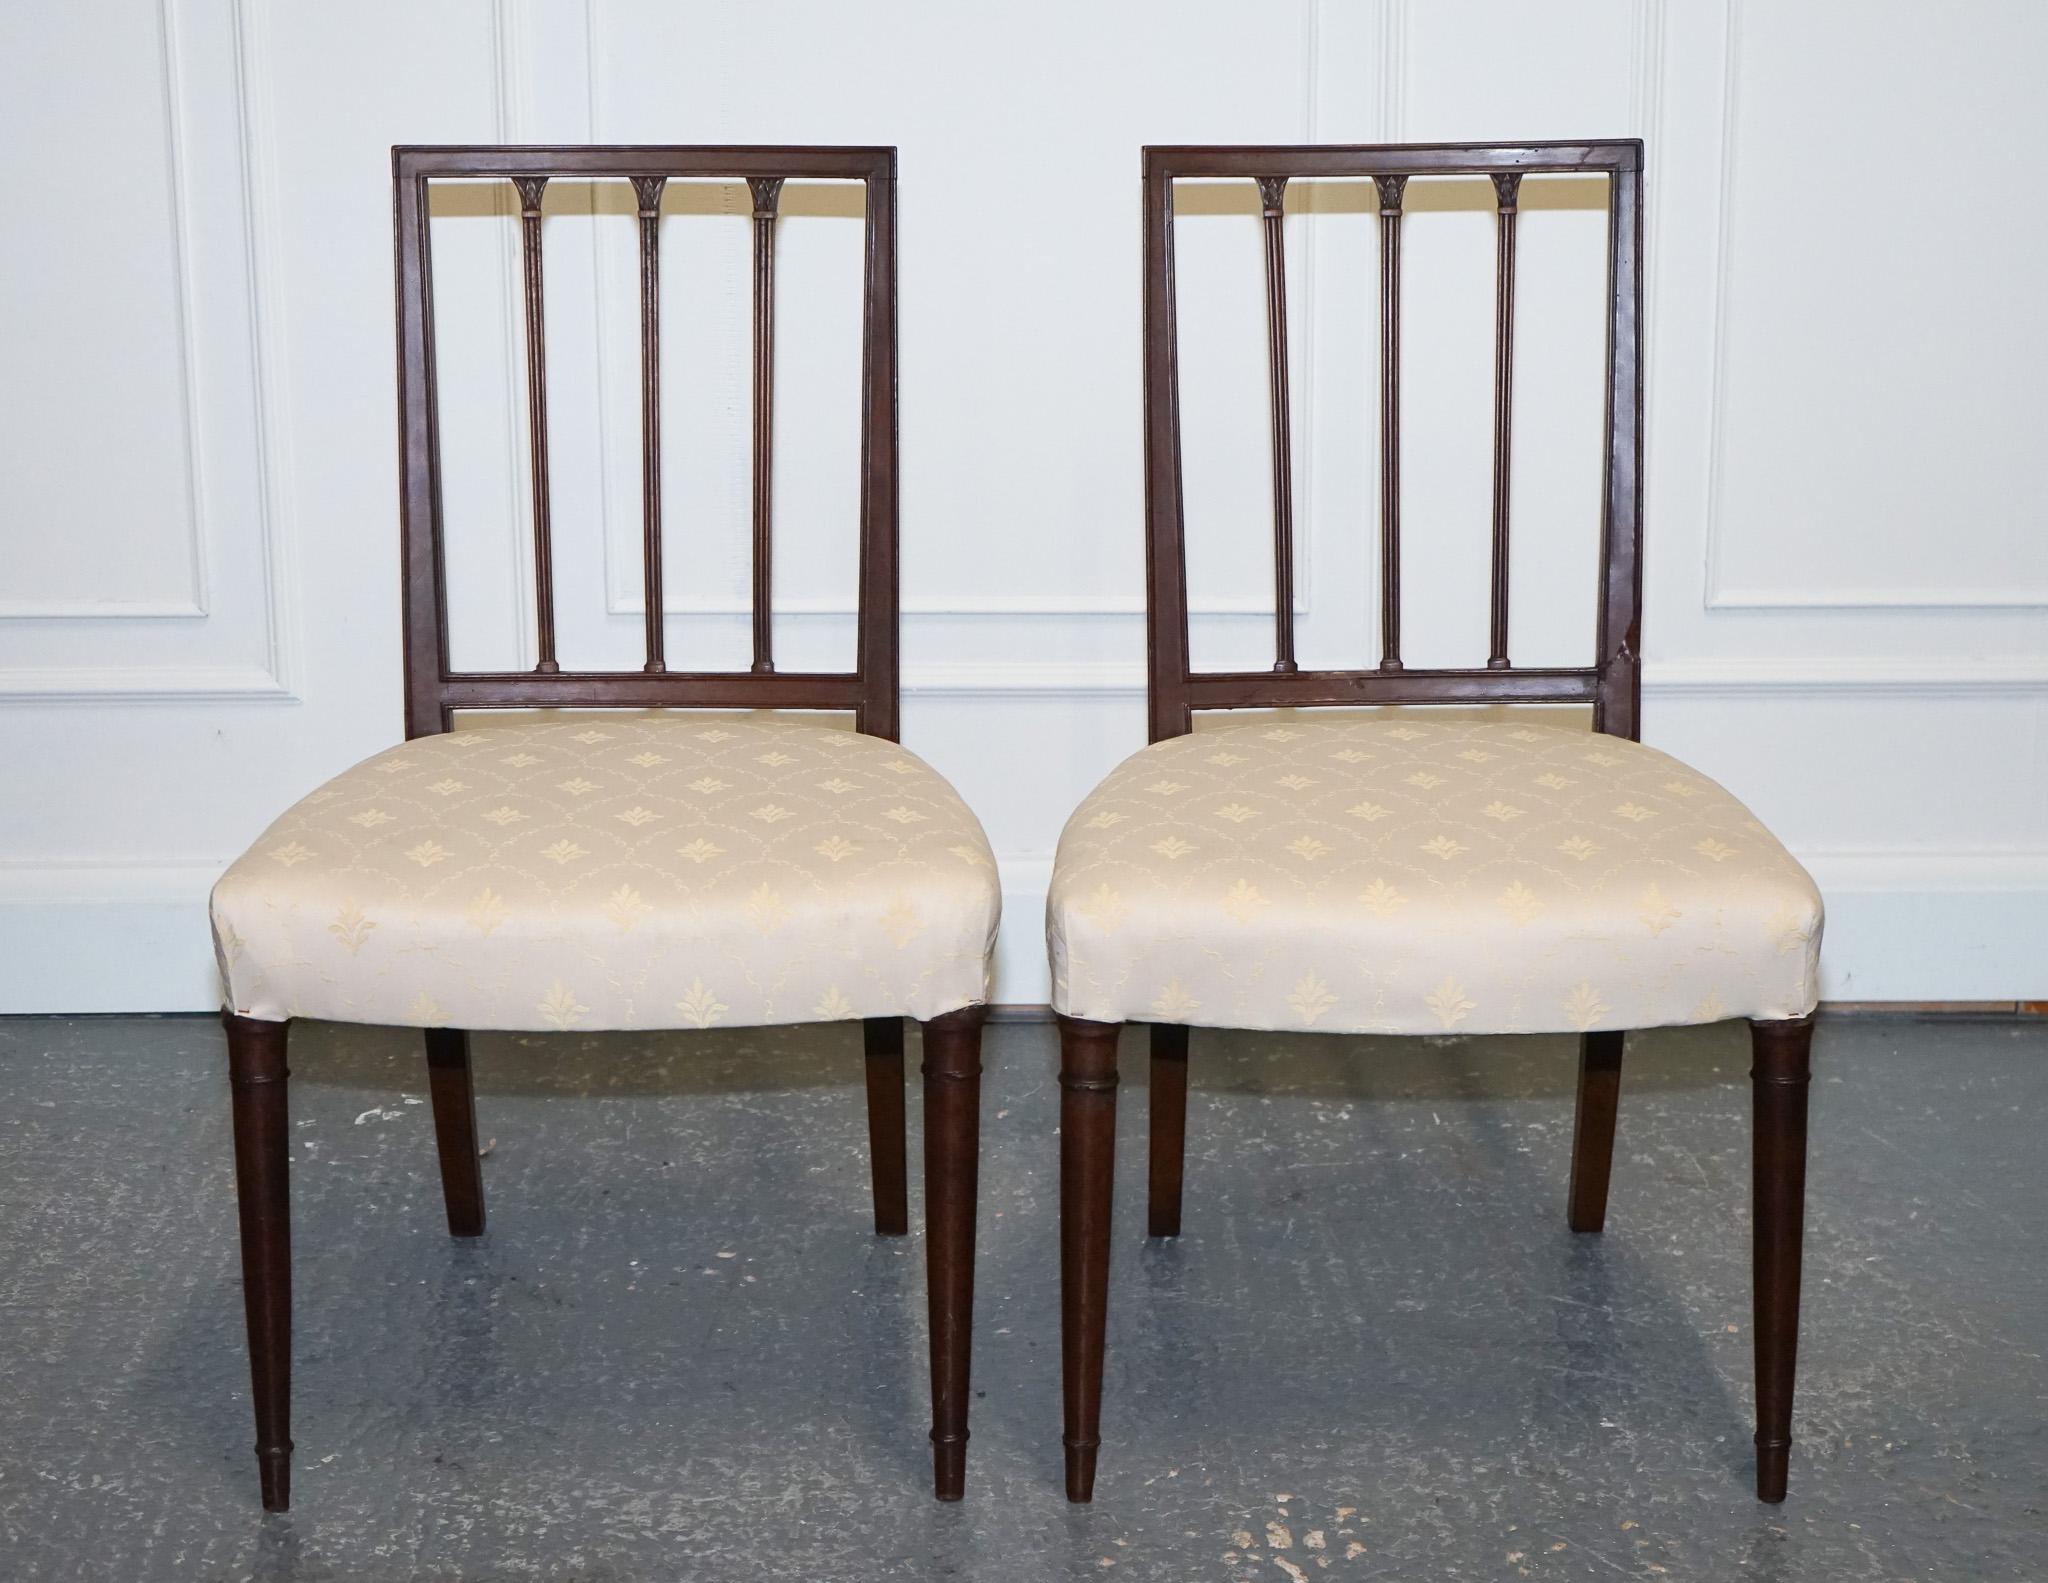 
We are delighted to offer for sale this Lovely Pair of Side Dining Chairs With Cream Upholstery.

A pair of Victorian side chairs with cream upholstery offers a touch of elegance and sophistication to any space. These chairs are characterised by